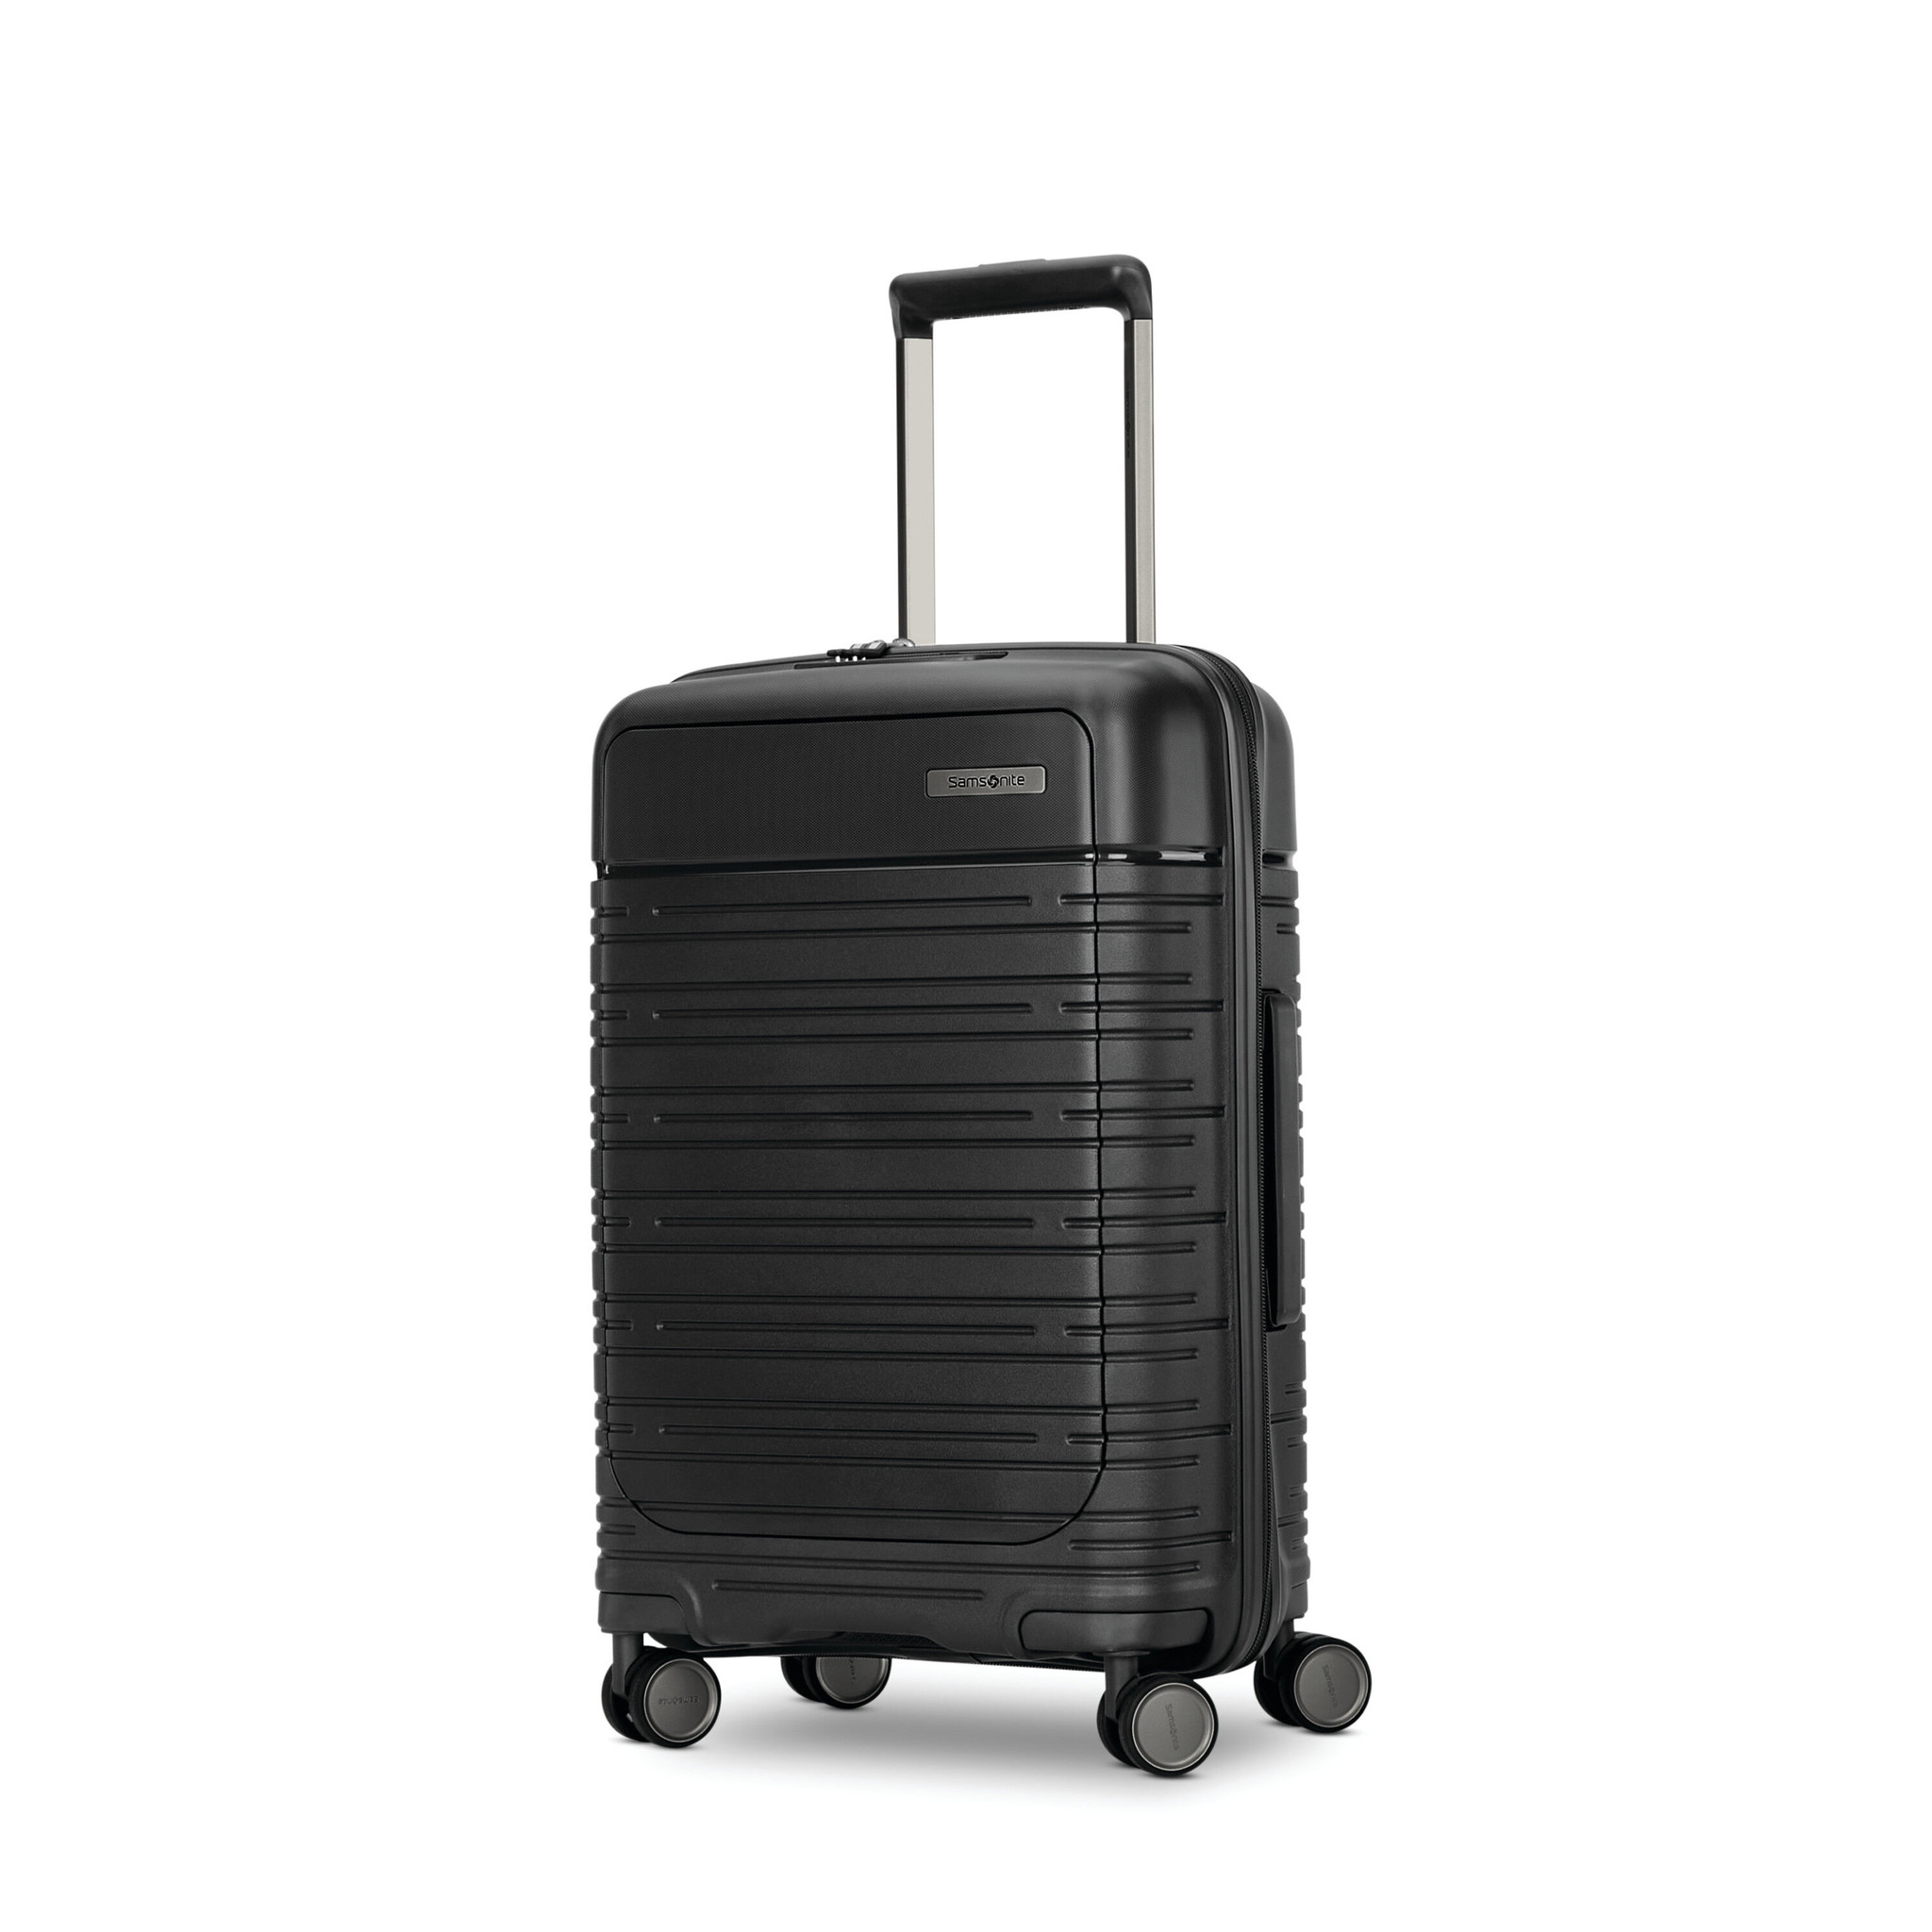 ELEVATION PLUS FRONTLOAD CARRY-ON SPINNER (142909 - Urban Traveller